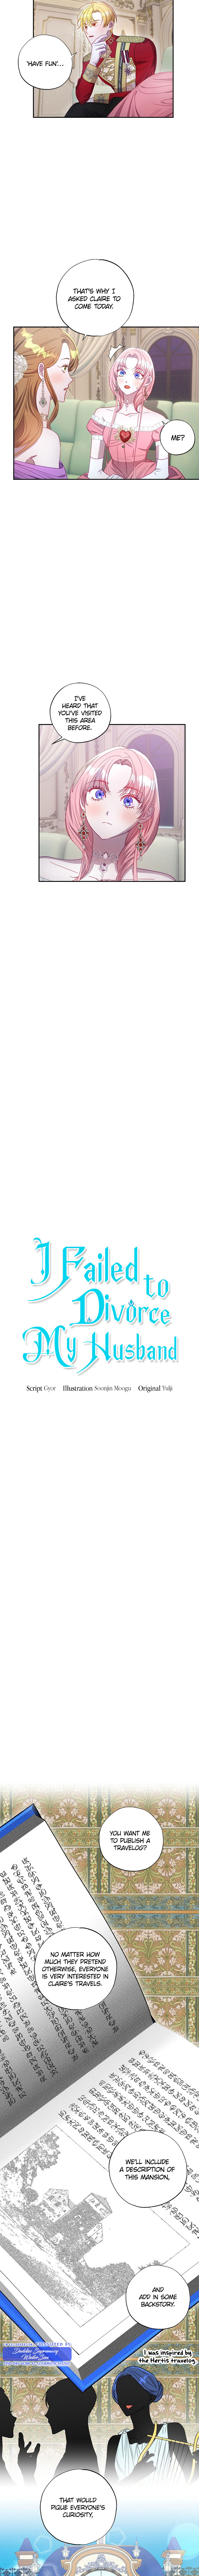 Divorce plan with husband failed - chapter 53 - #2